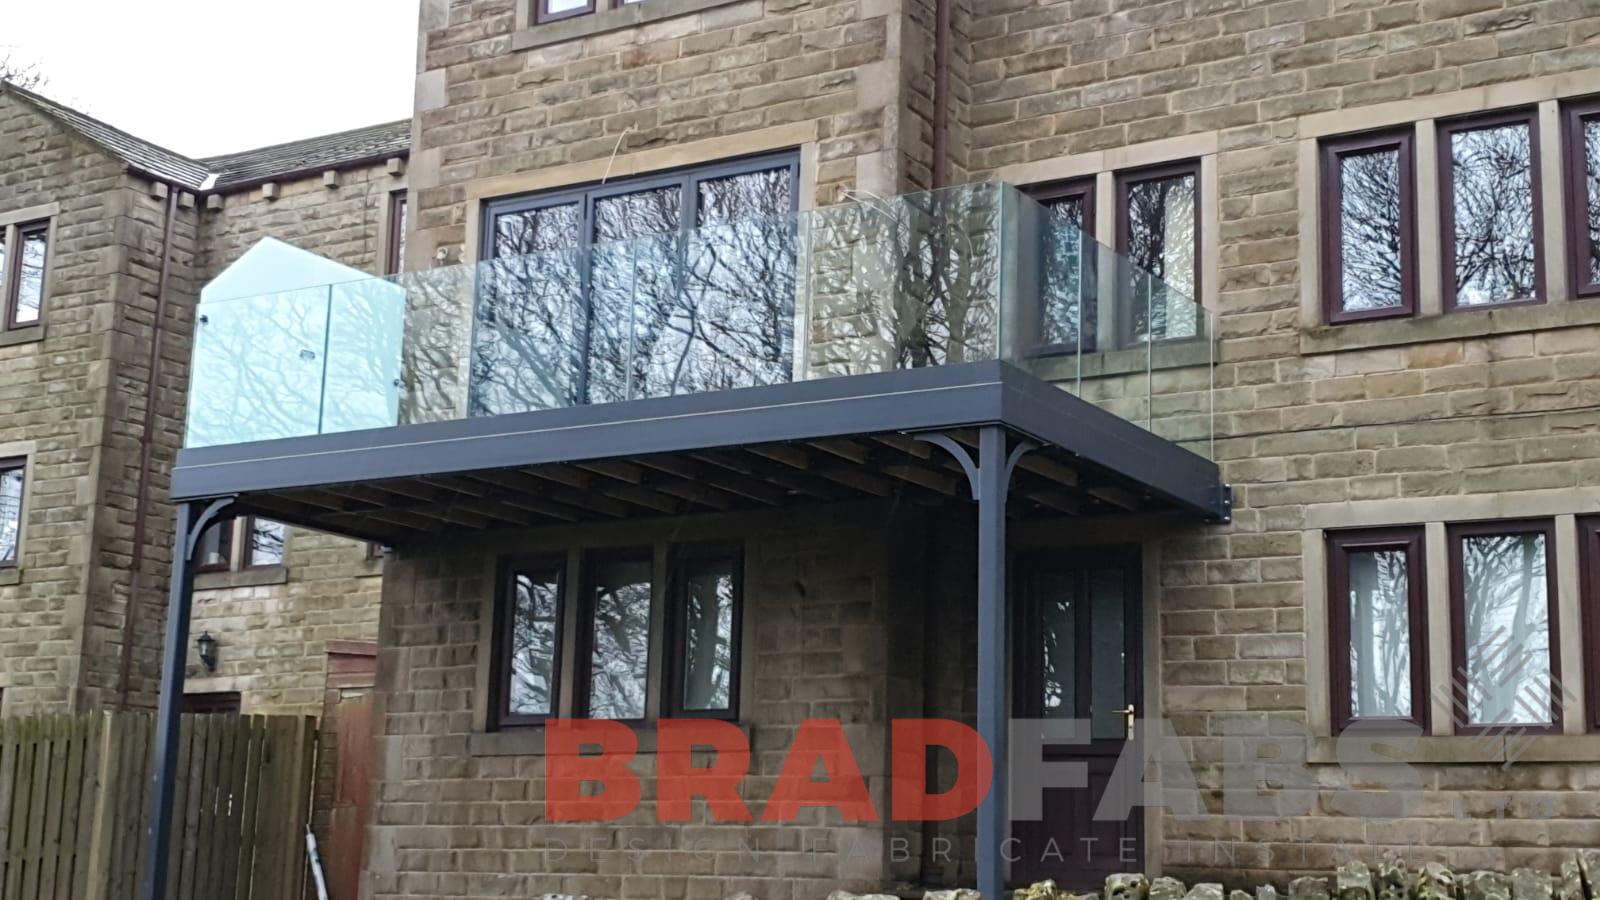 mild steel channel system balustrade with infinity glass balustrade with privacy screen to one side on a balcony with two supporting legs by Bradfabs Ltd 